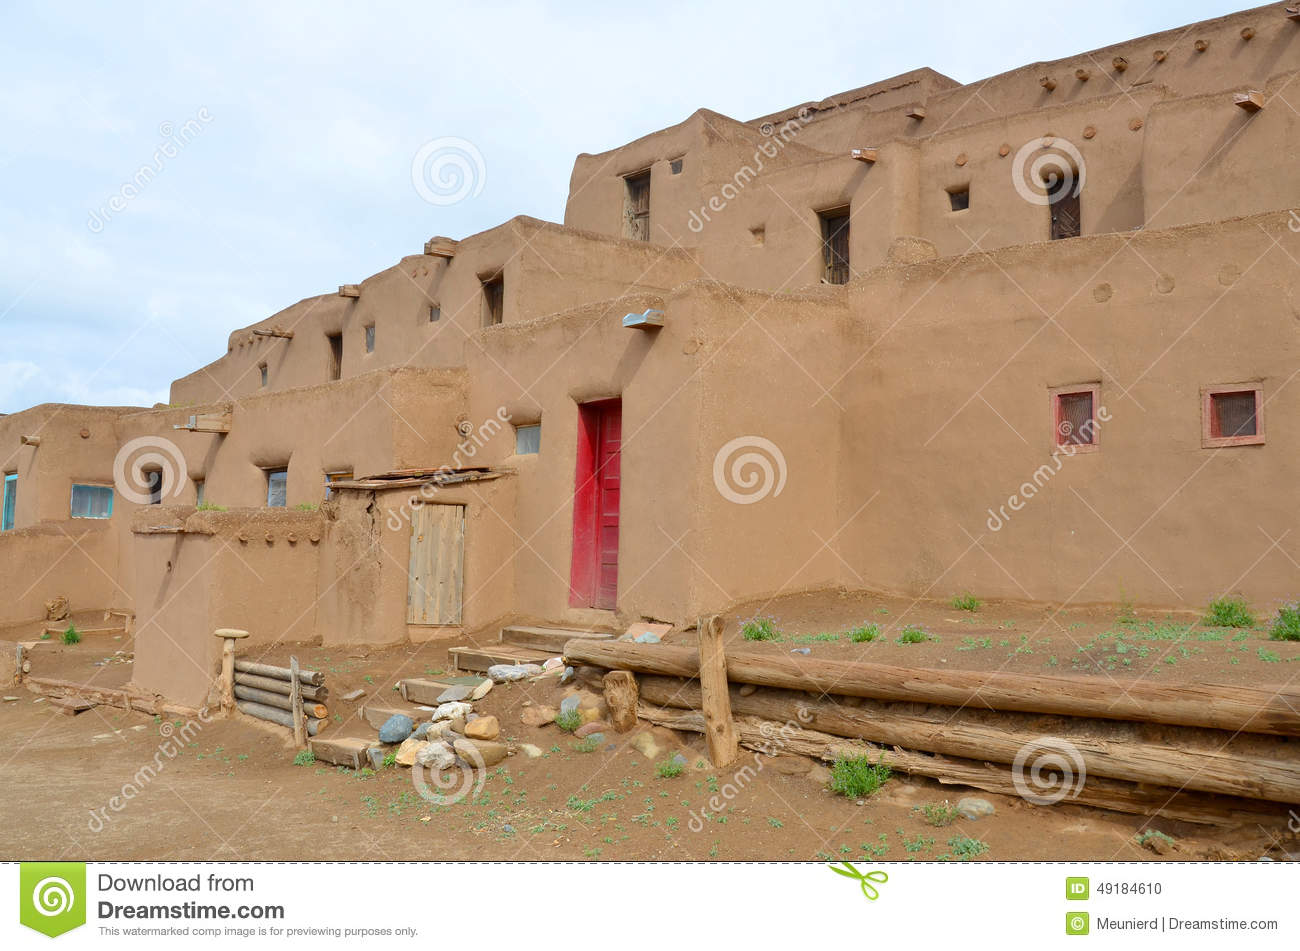 Adobe Walls Of Mud And Straw Are Typical Of Native American Culture In